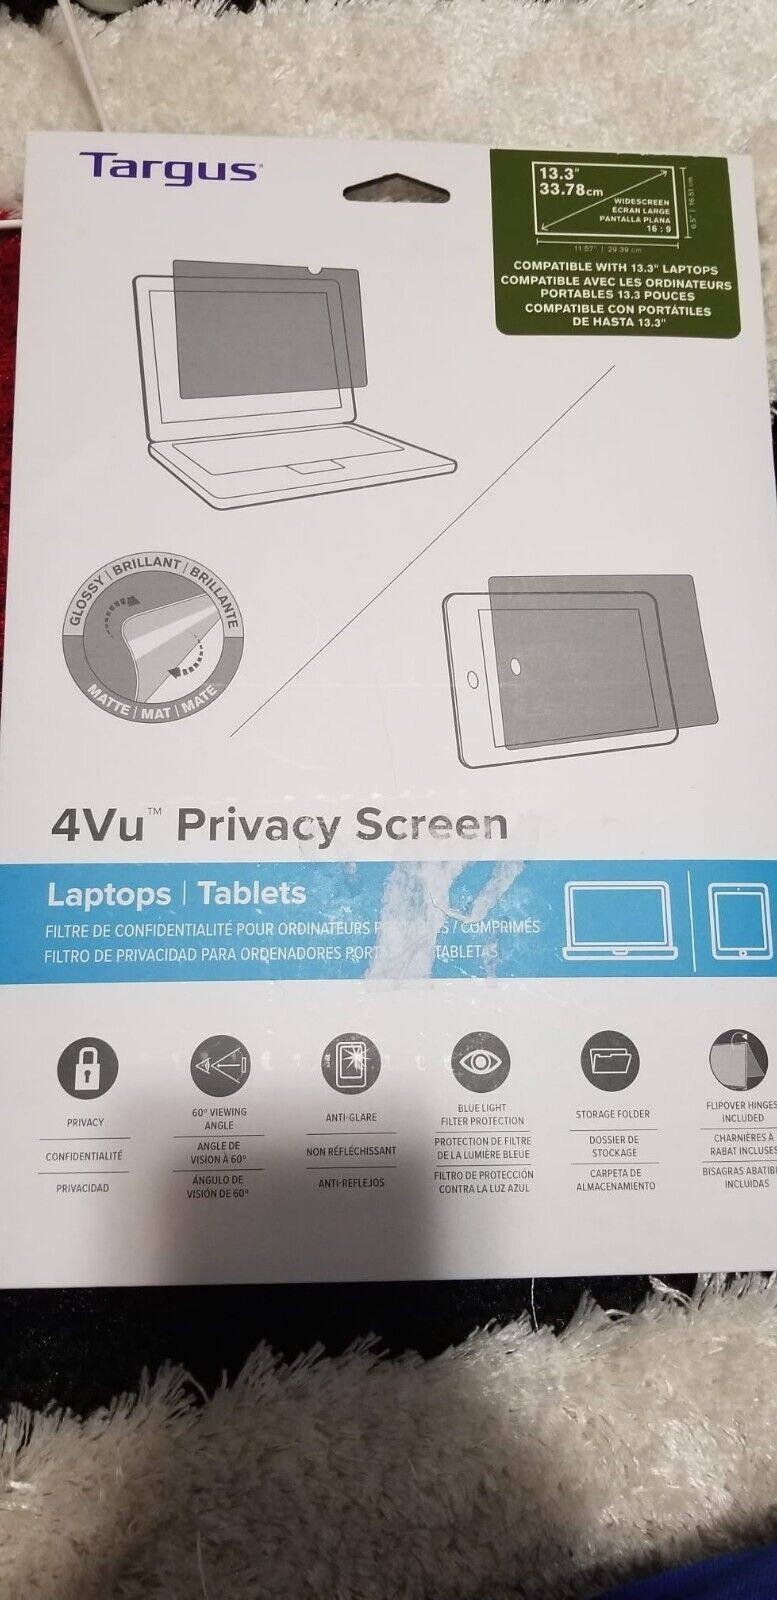 Targus 13.3in 33.78cm 4Vu Widescreen Laptop Tablets Privacy Screen NEW IN SEALED